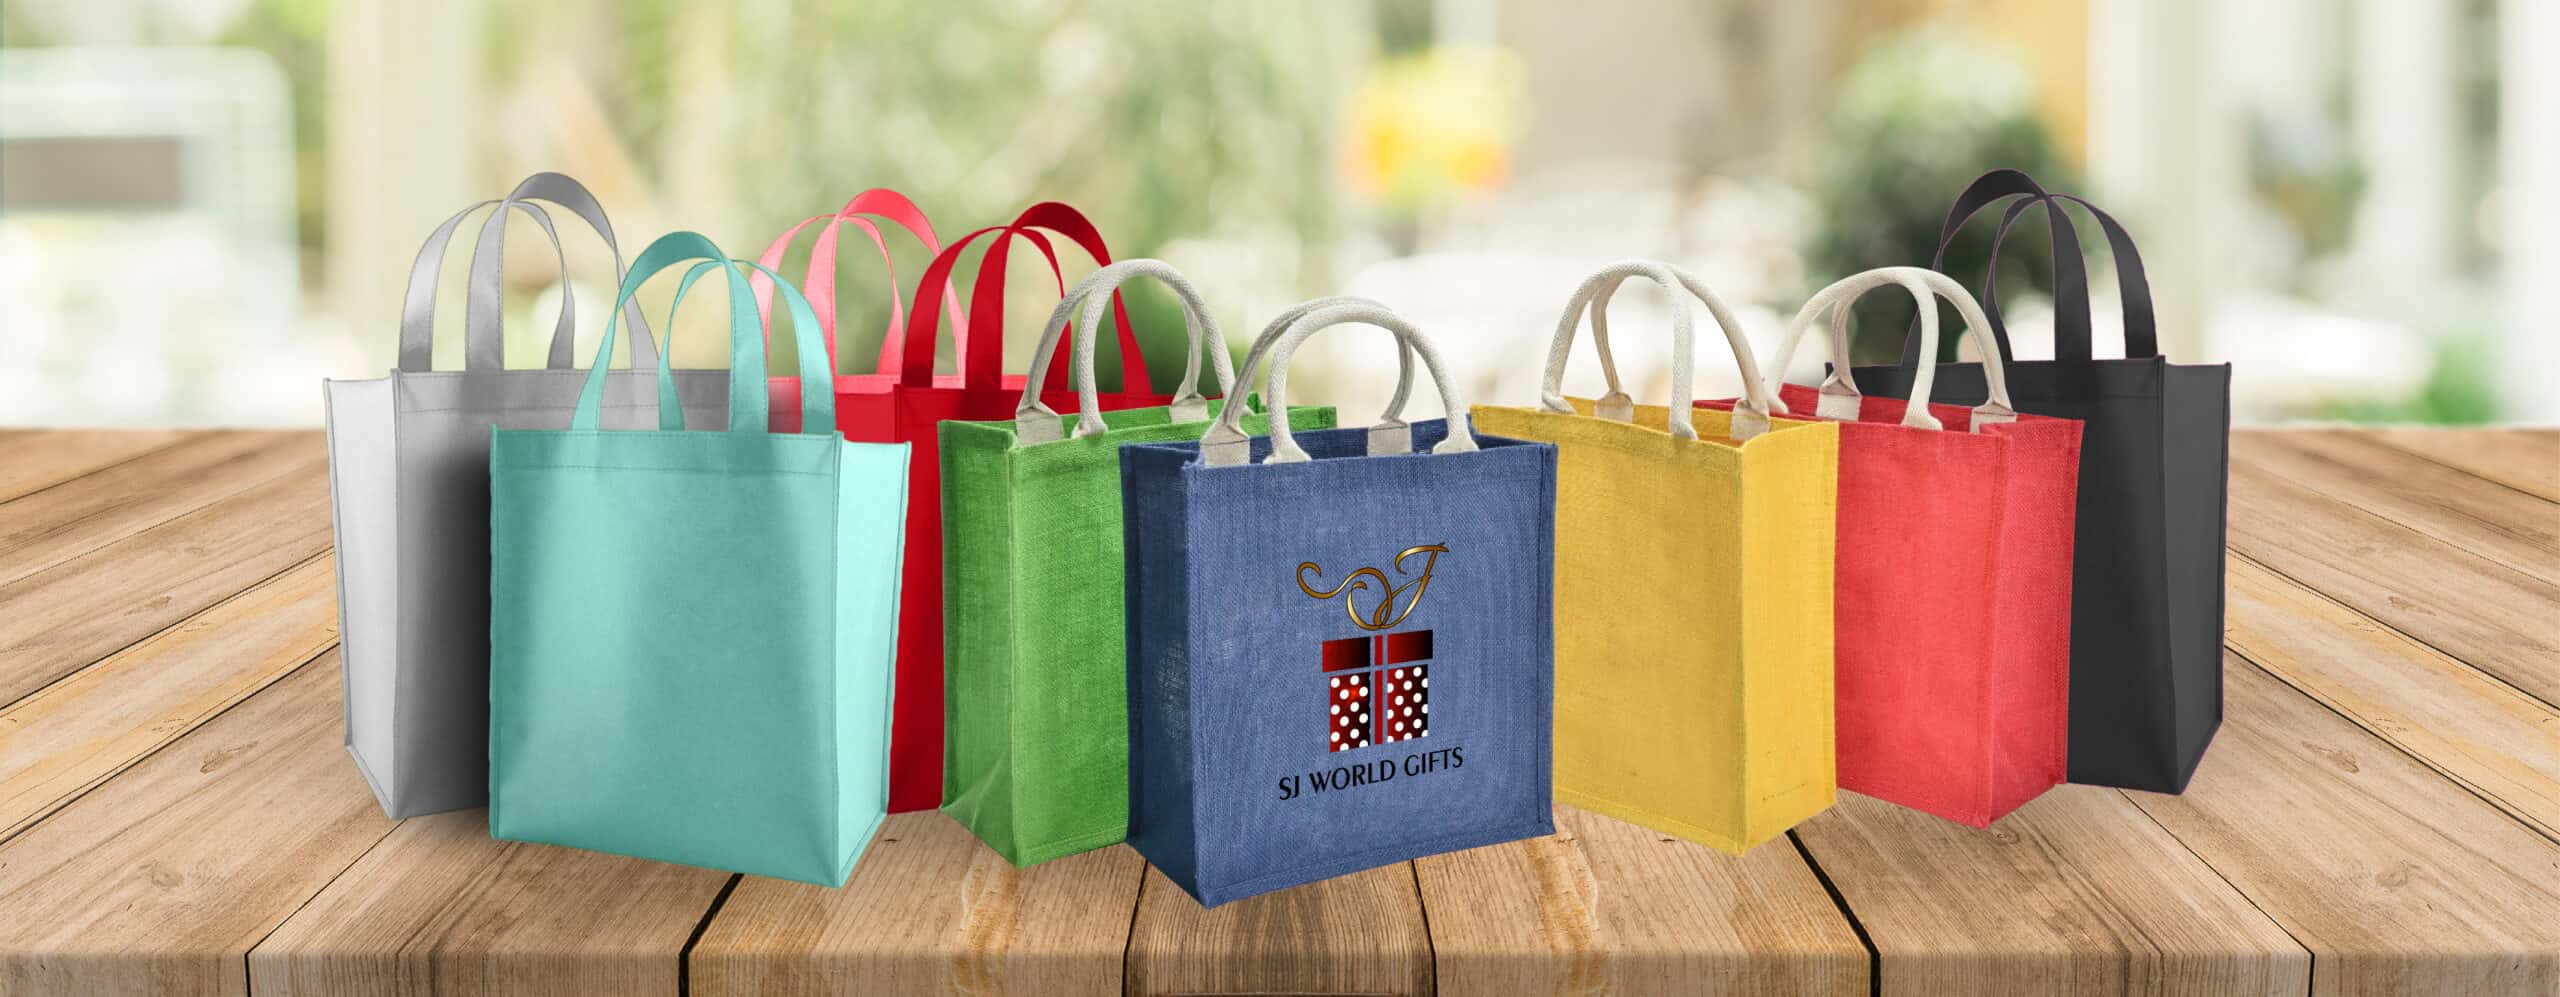 Recycle Bag from SJ-World Gifts Malaysia | Corporate Gift Supplier in Malaysia